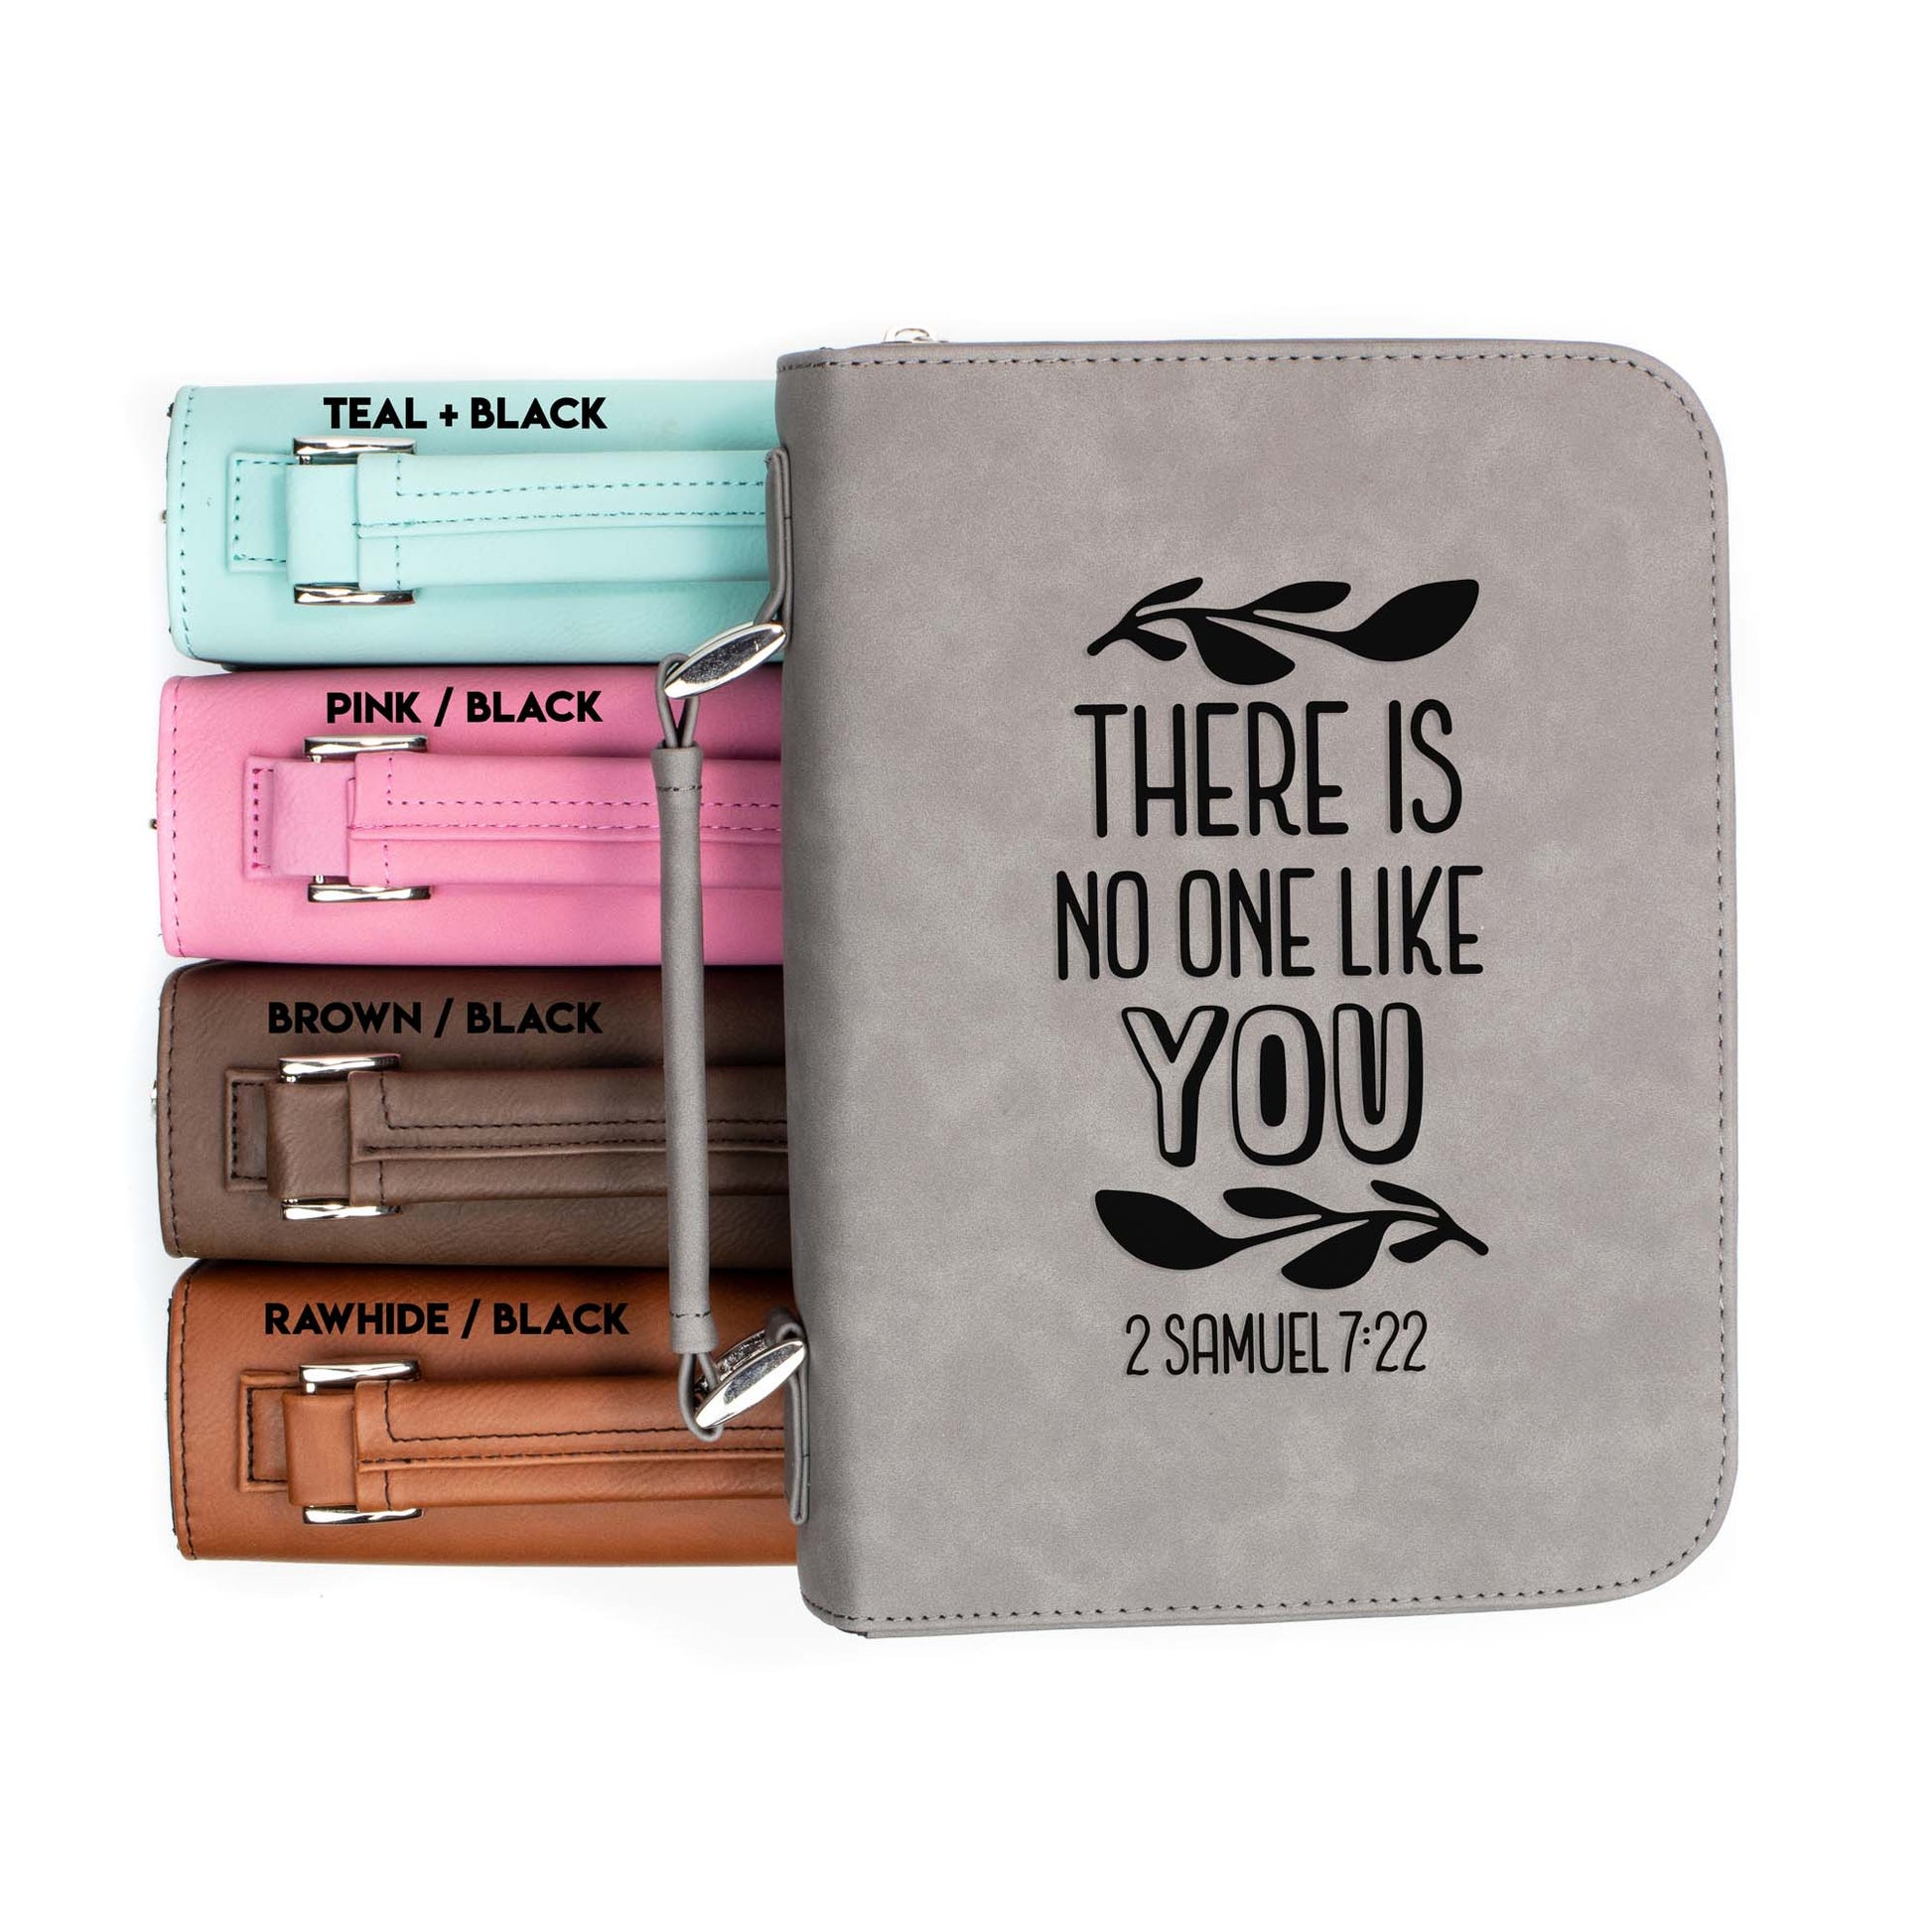 There is No One Like You 2 Samuel 7-22 Bible Cover | Faux Leather With Handle + Pockets